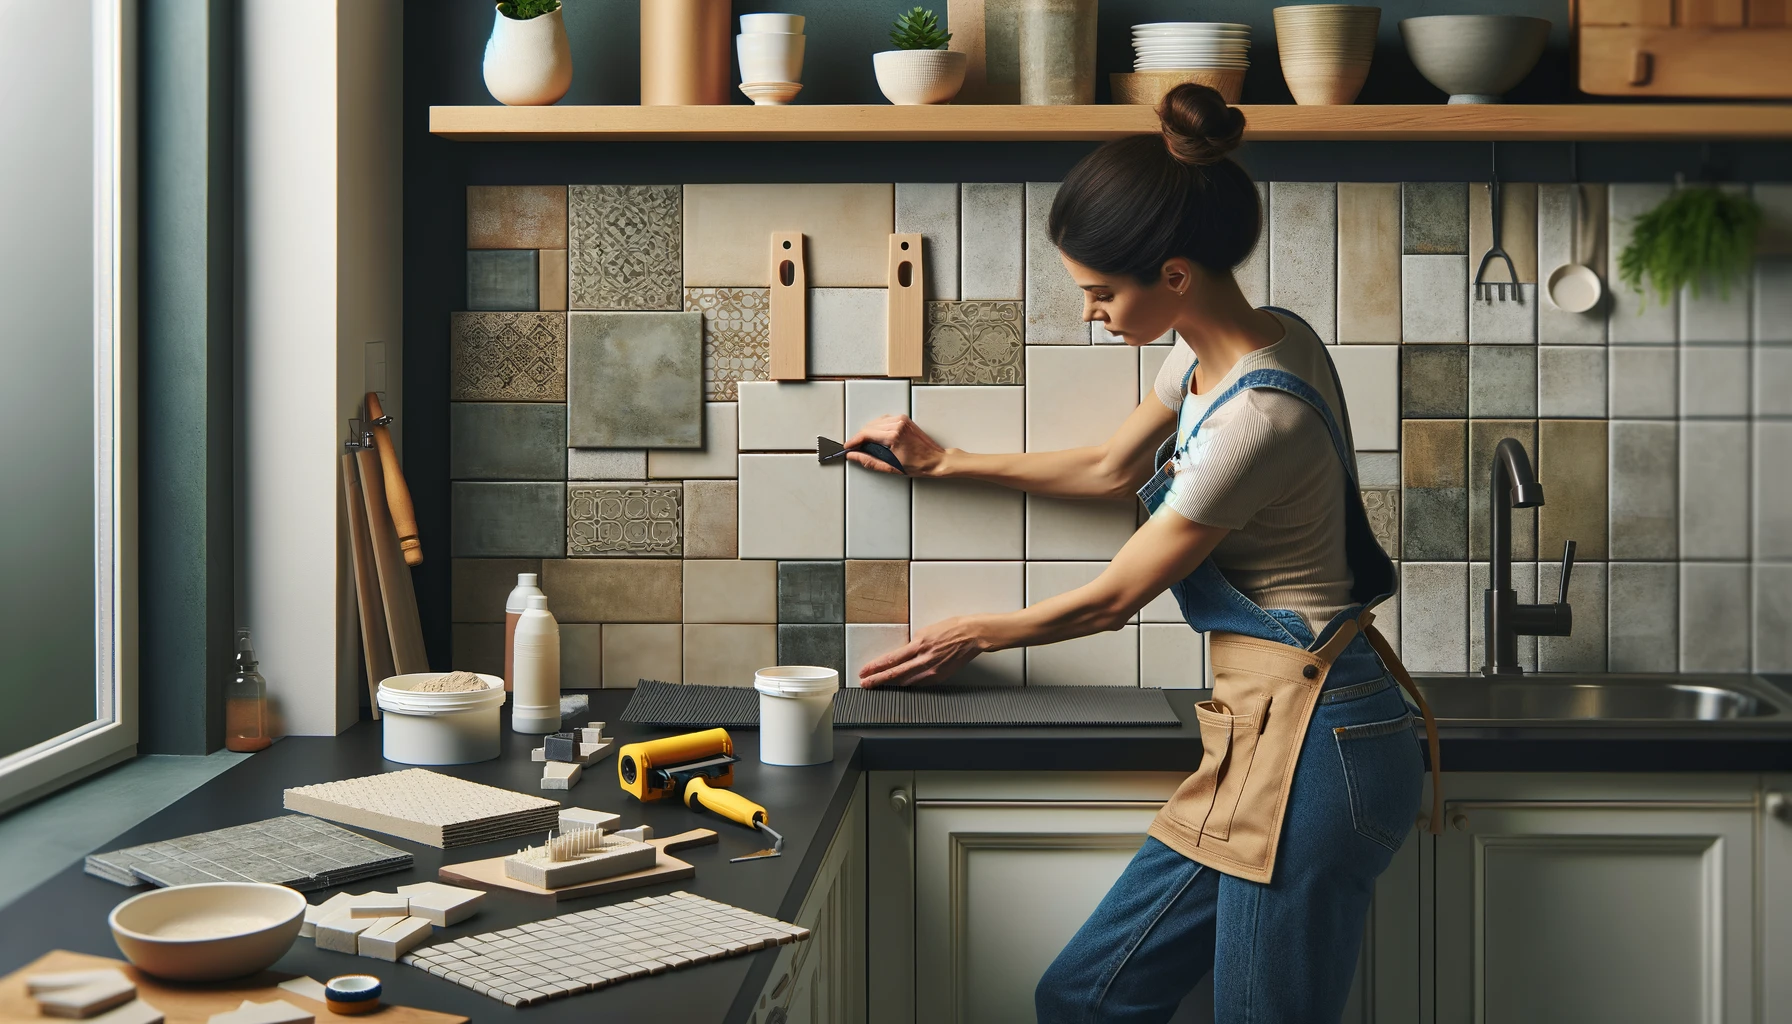 A woman installing tiles for a kitchen backsplash, surrounded by materials like ceramic or glass tiles, tile adhesive, a notched trowel